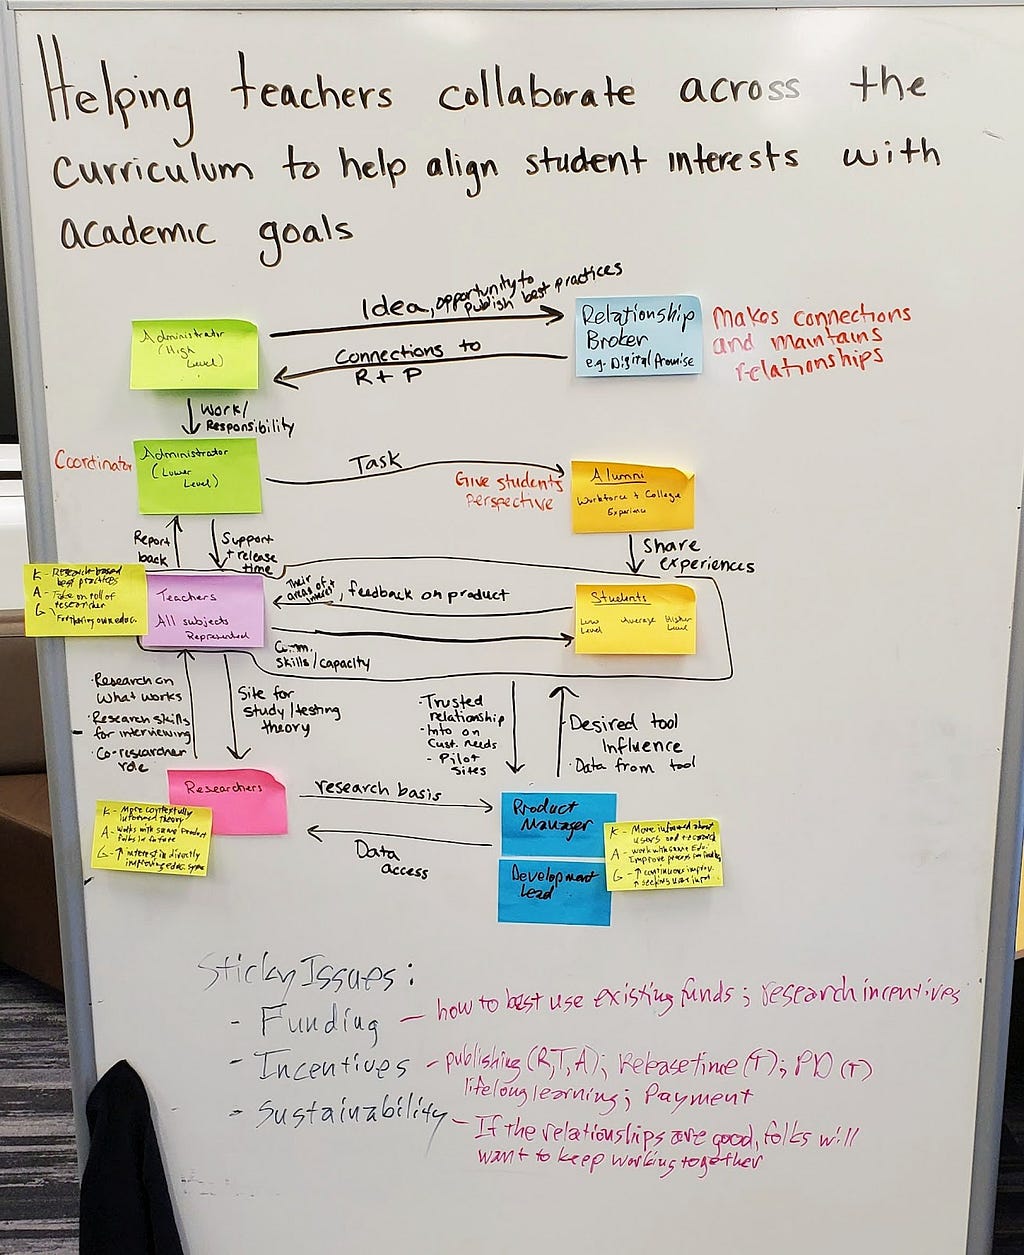 Whiteboard titled “how teachers collaborate across the curriculum,” with flow chart, and then “sticky issues” of “funding,” “incentives,” and “sustainability” at the bottom.